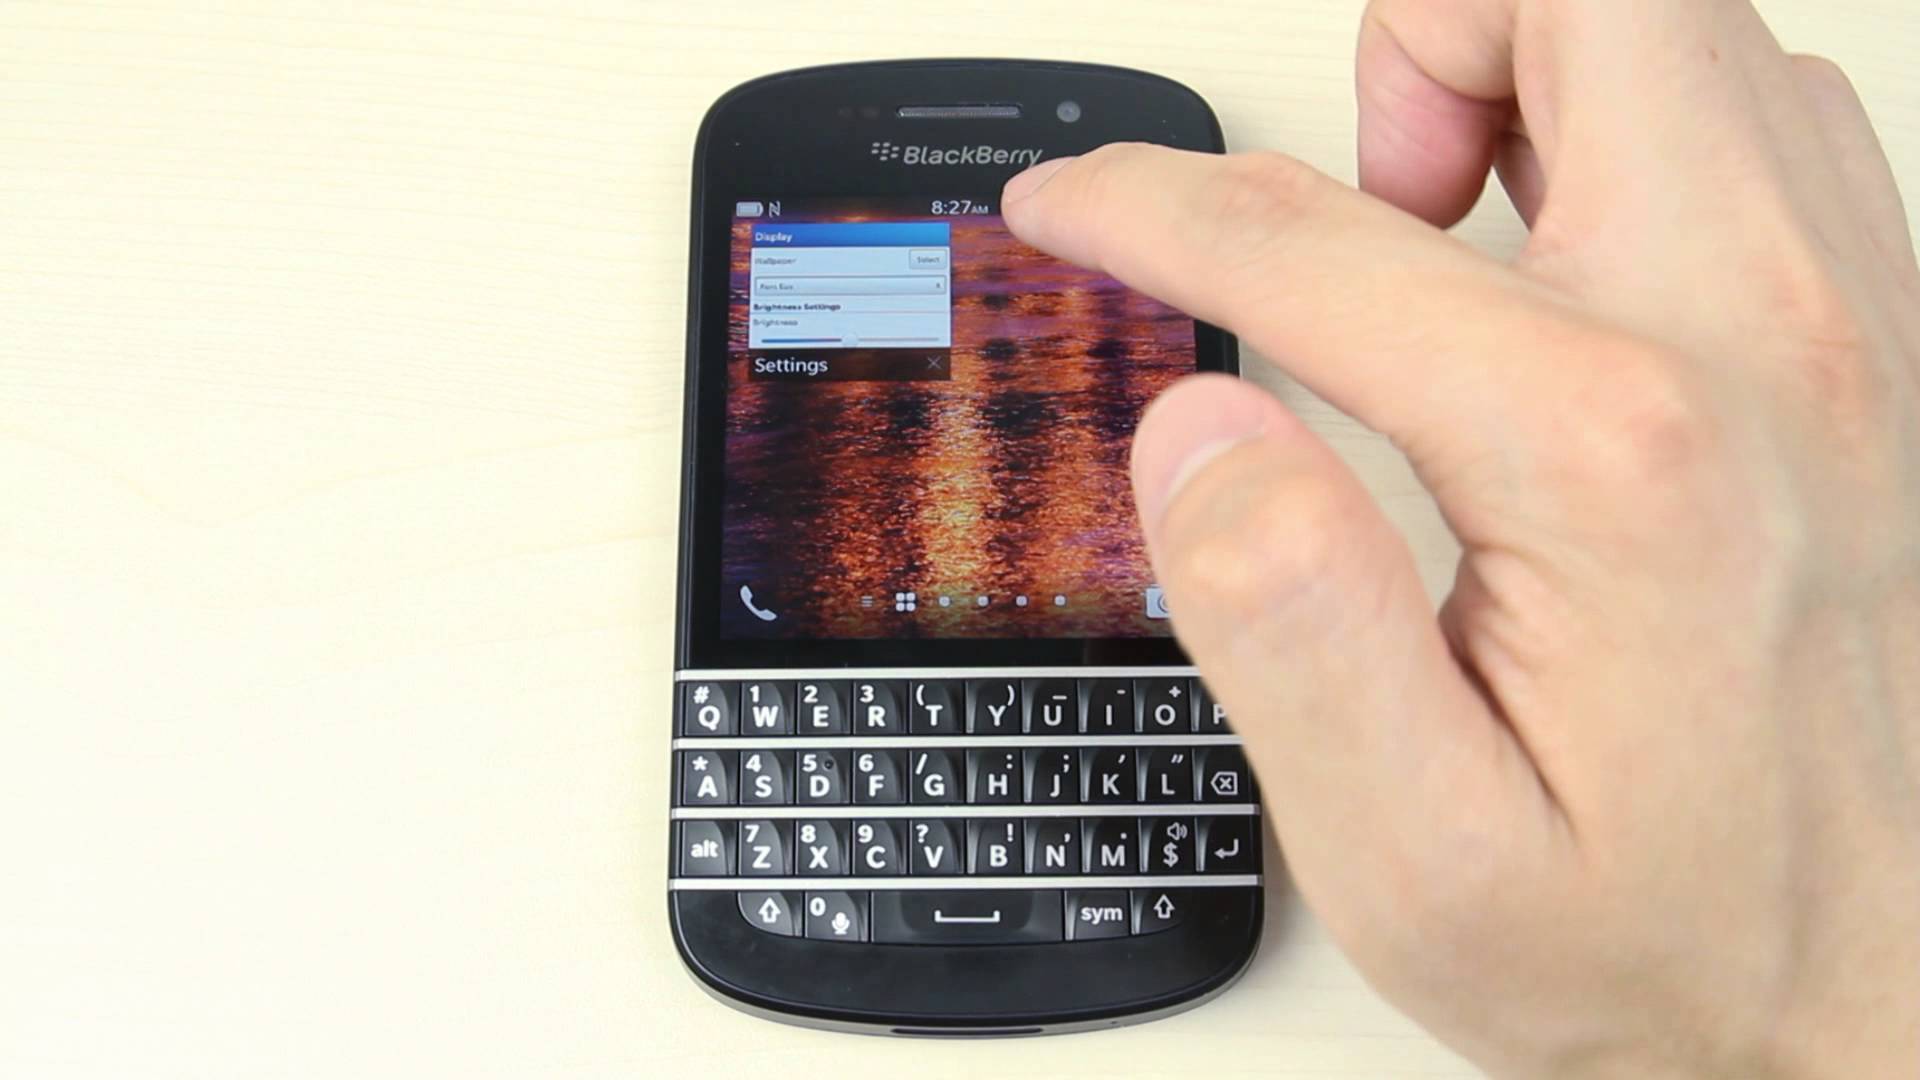 How To Change The Wallpaper On Blackberry Q10